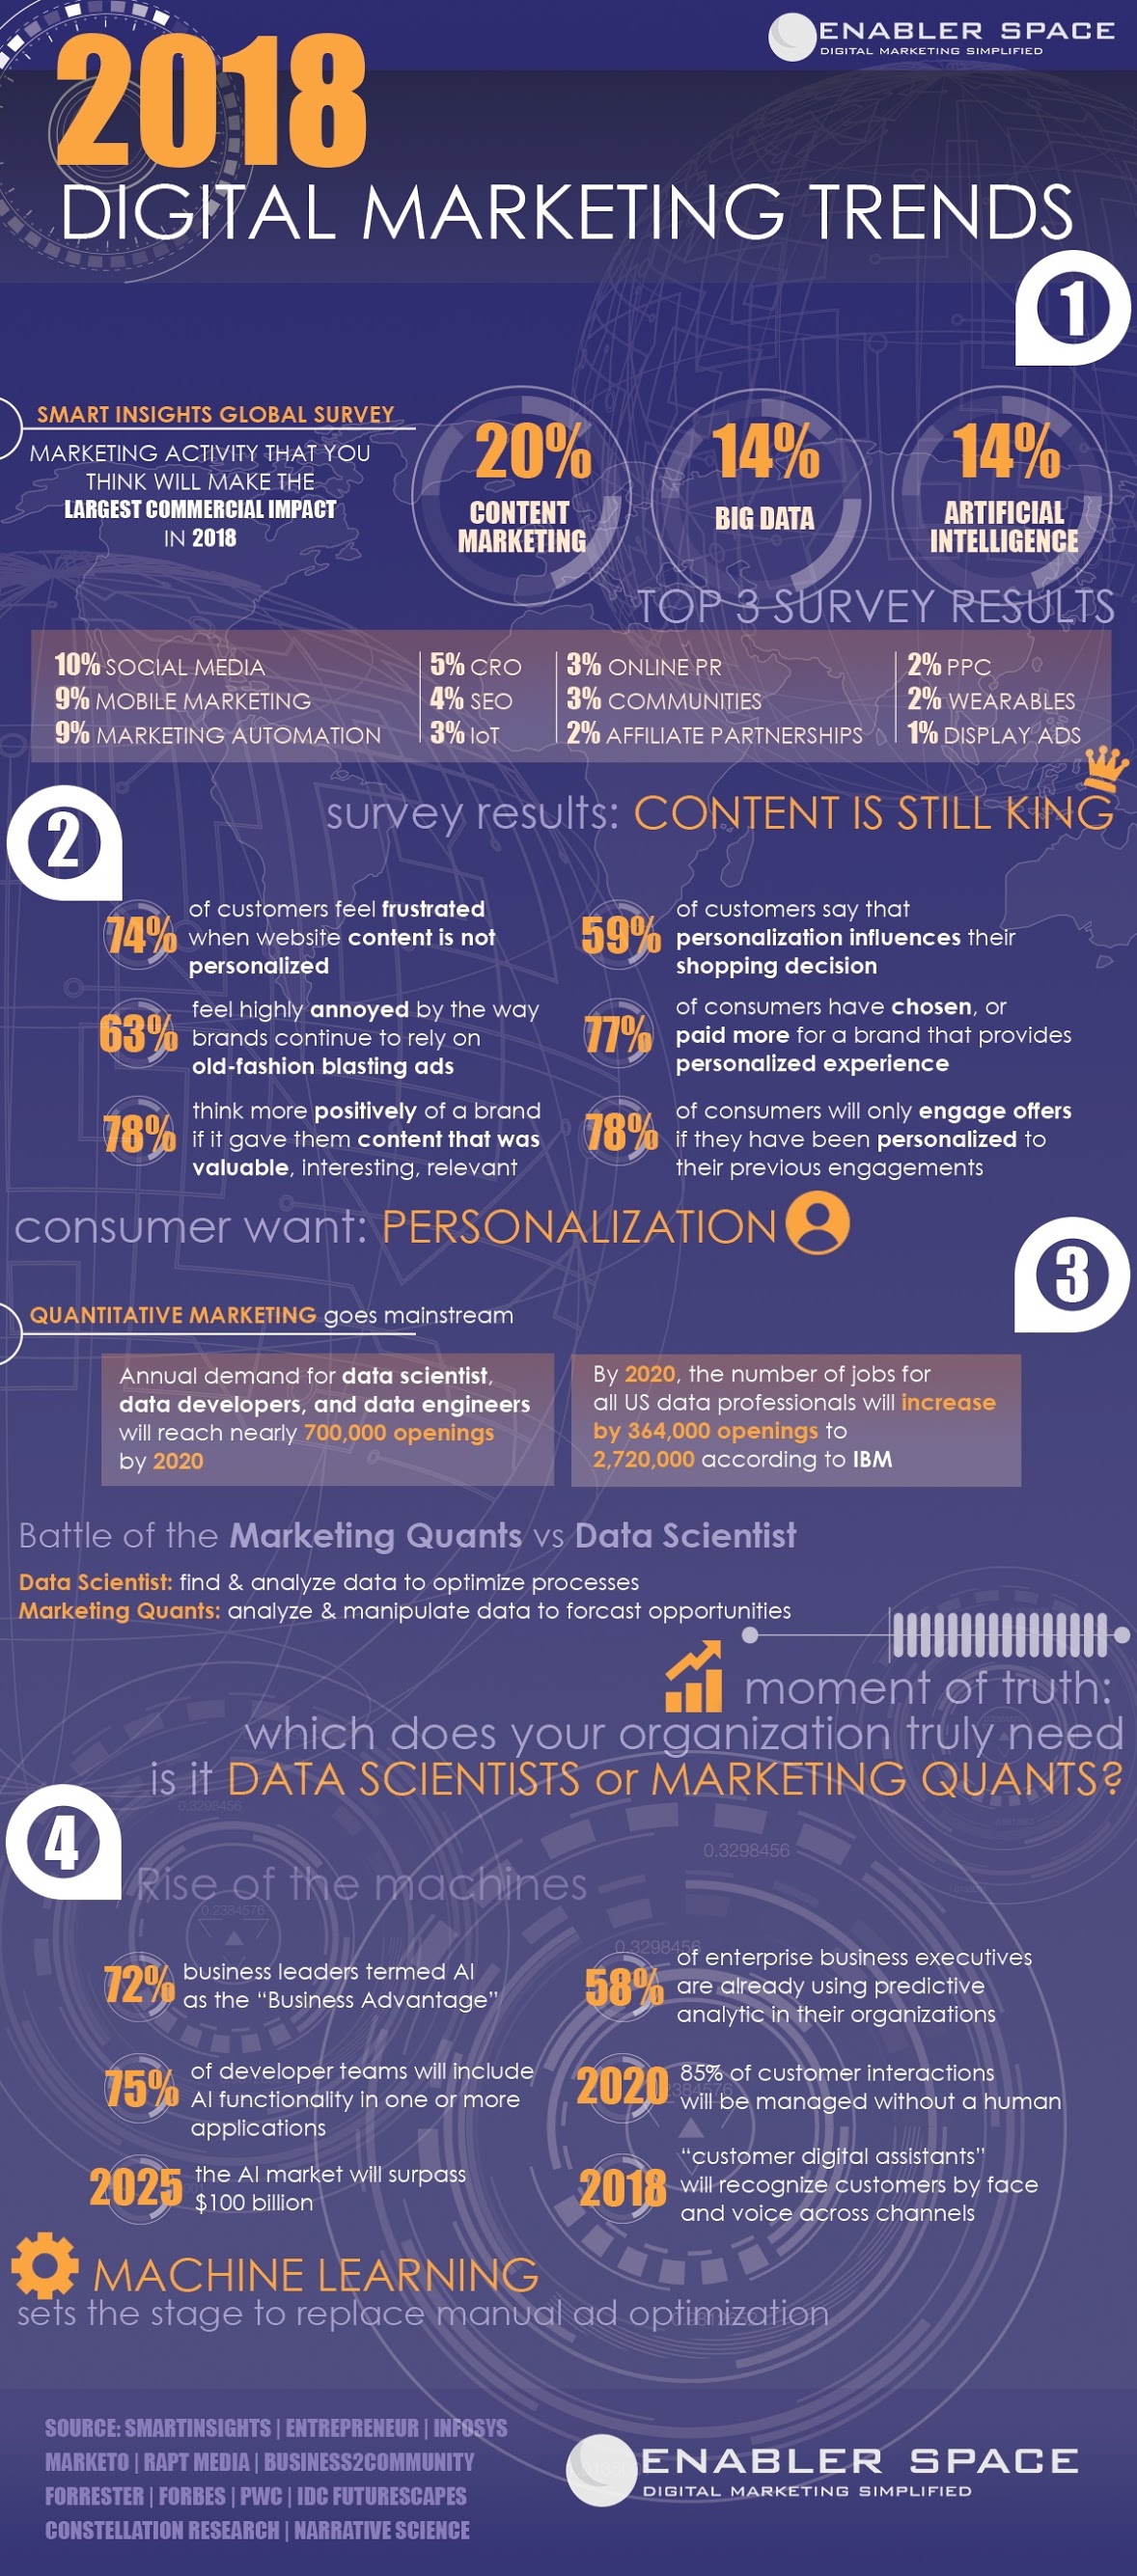 [Infographic] 2018 Digital Marketing Trends and Statistics